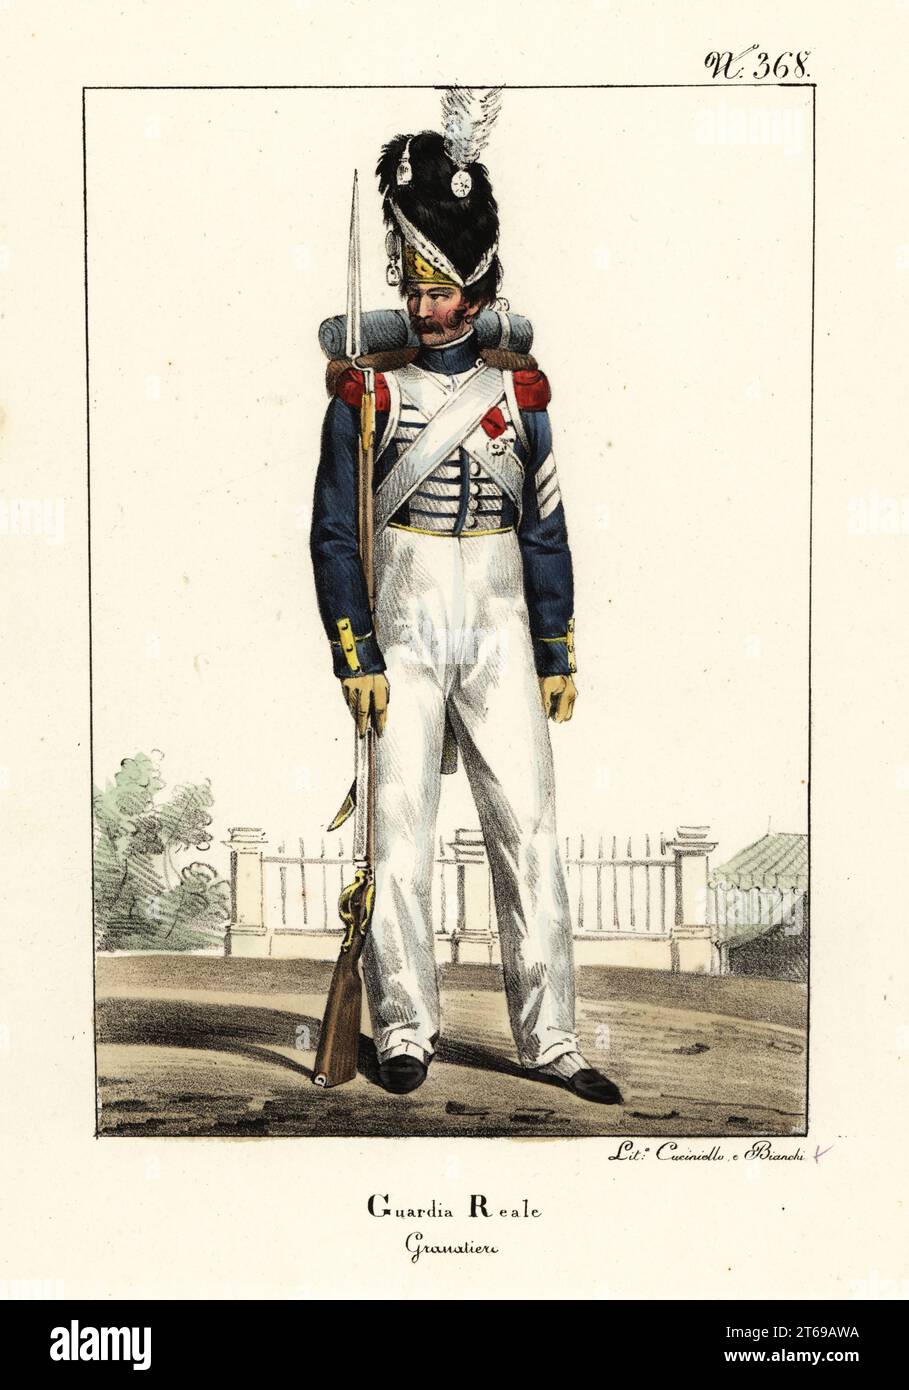 Uniform of an infantry Grenadier with the French Royal Guard, Bourbon Restoration. In bearskin with brush, blue coat with white frogging, crimson epaulettes, pantalons, with musket and backpack. Garde Royale, Grenadier. Handcoloured lithograph by Lorenzo Bianchi and Domenico Cuciniello after Hippolyte Lecomte from Costumi civili e militari della monarchia francese dal 1200 al 1820, Naples, 1825. Italian edition of Lecomtes Civilian and military costumes of the French monarchy from 1200 to 1820. Stock Photo